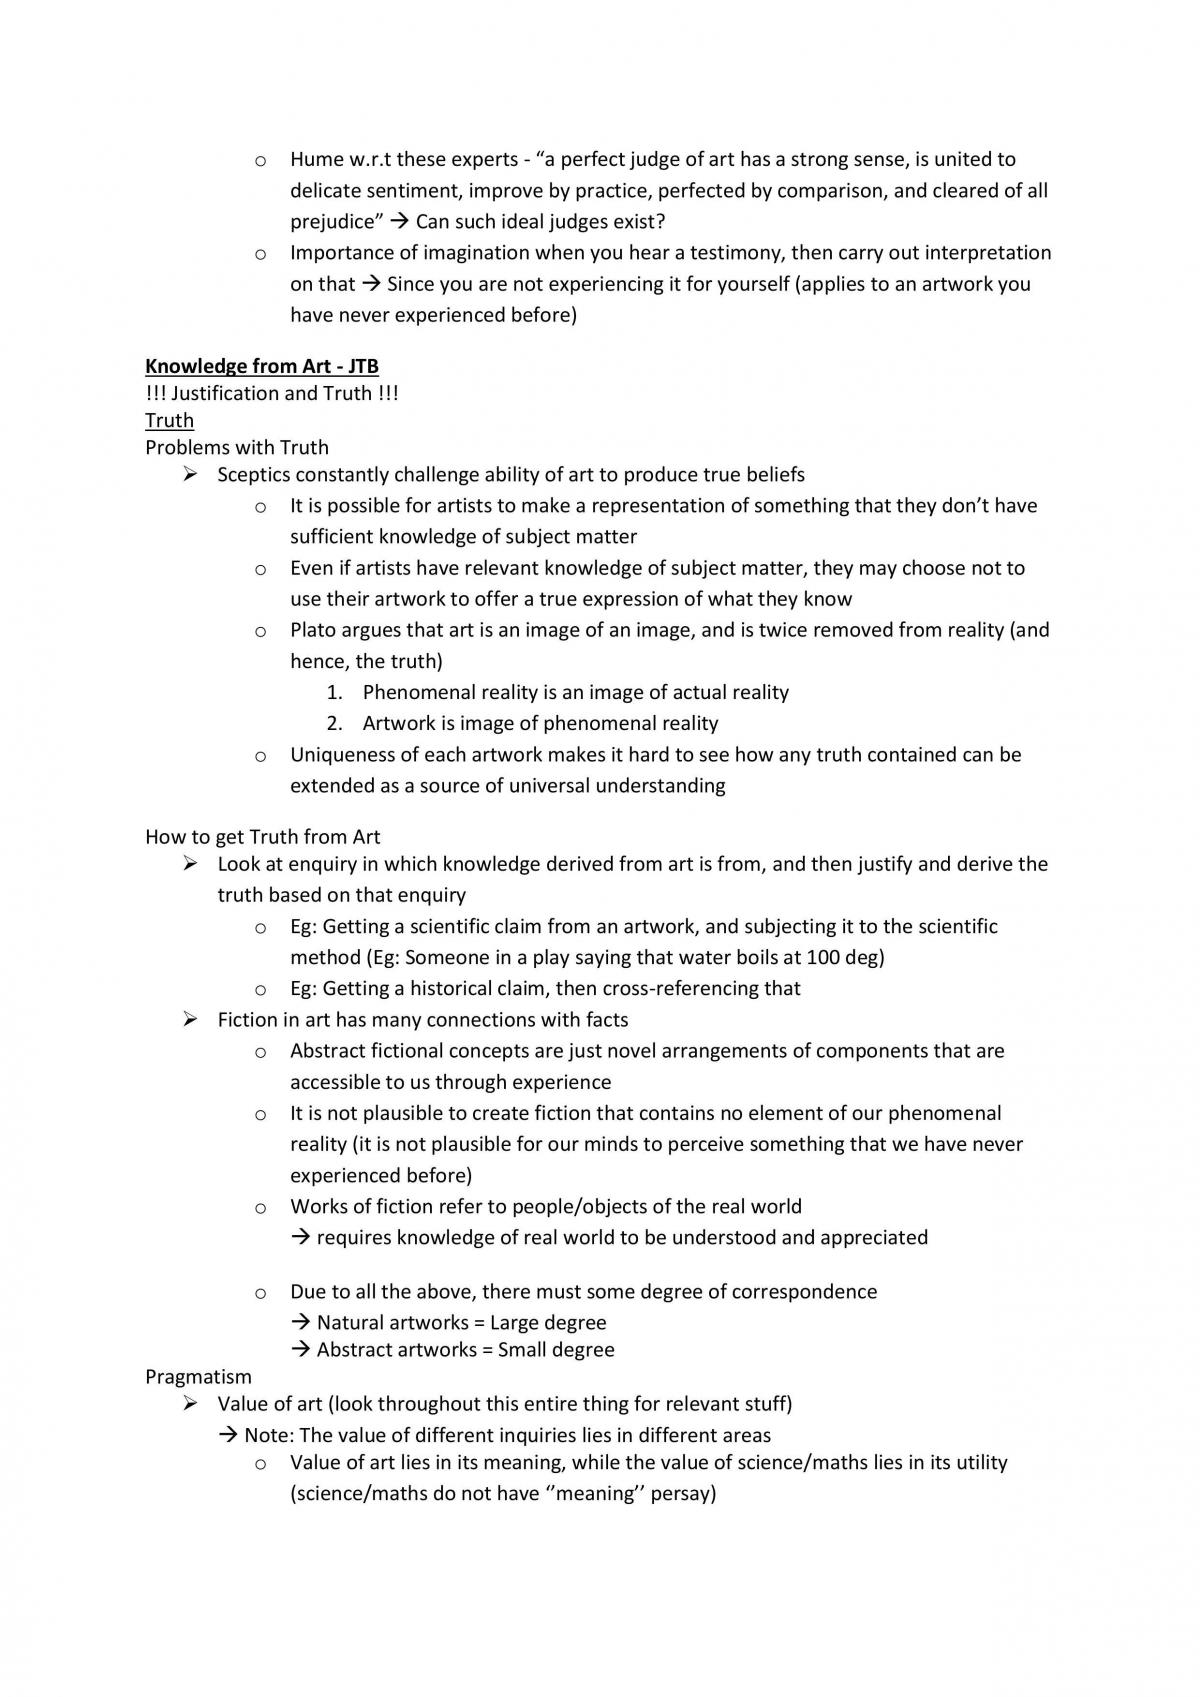 H2 Knowledge and Inquiry Complete Study Notes - Page 60